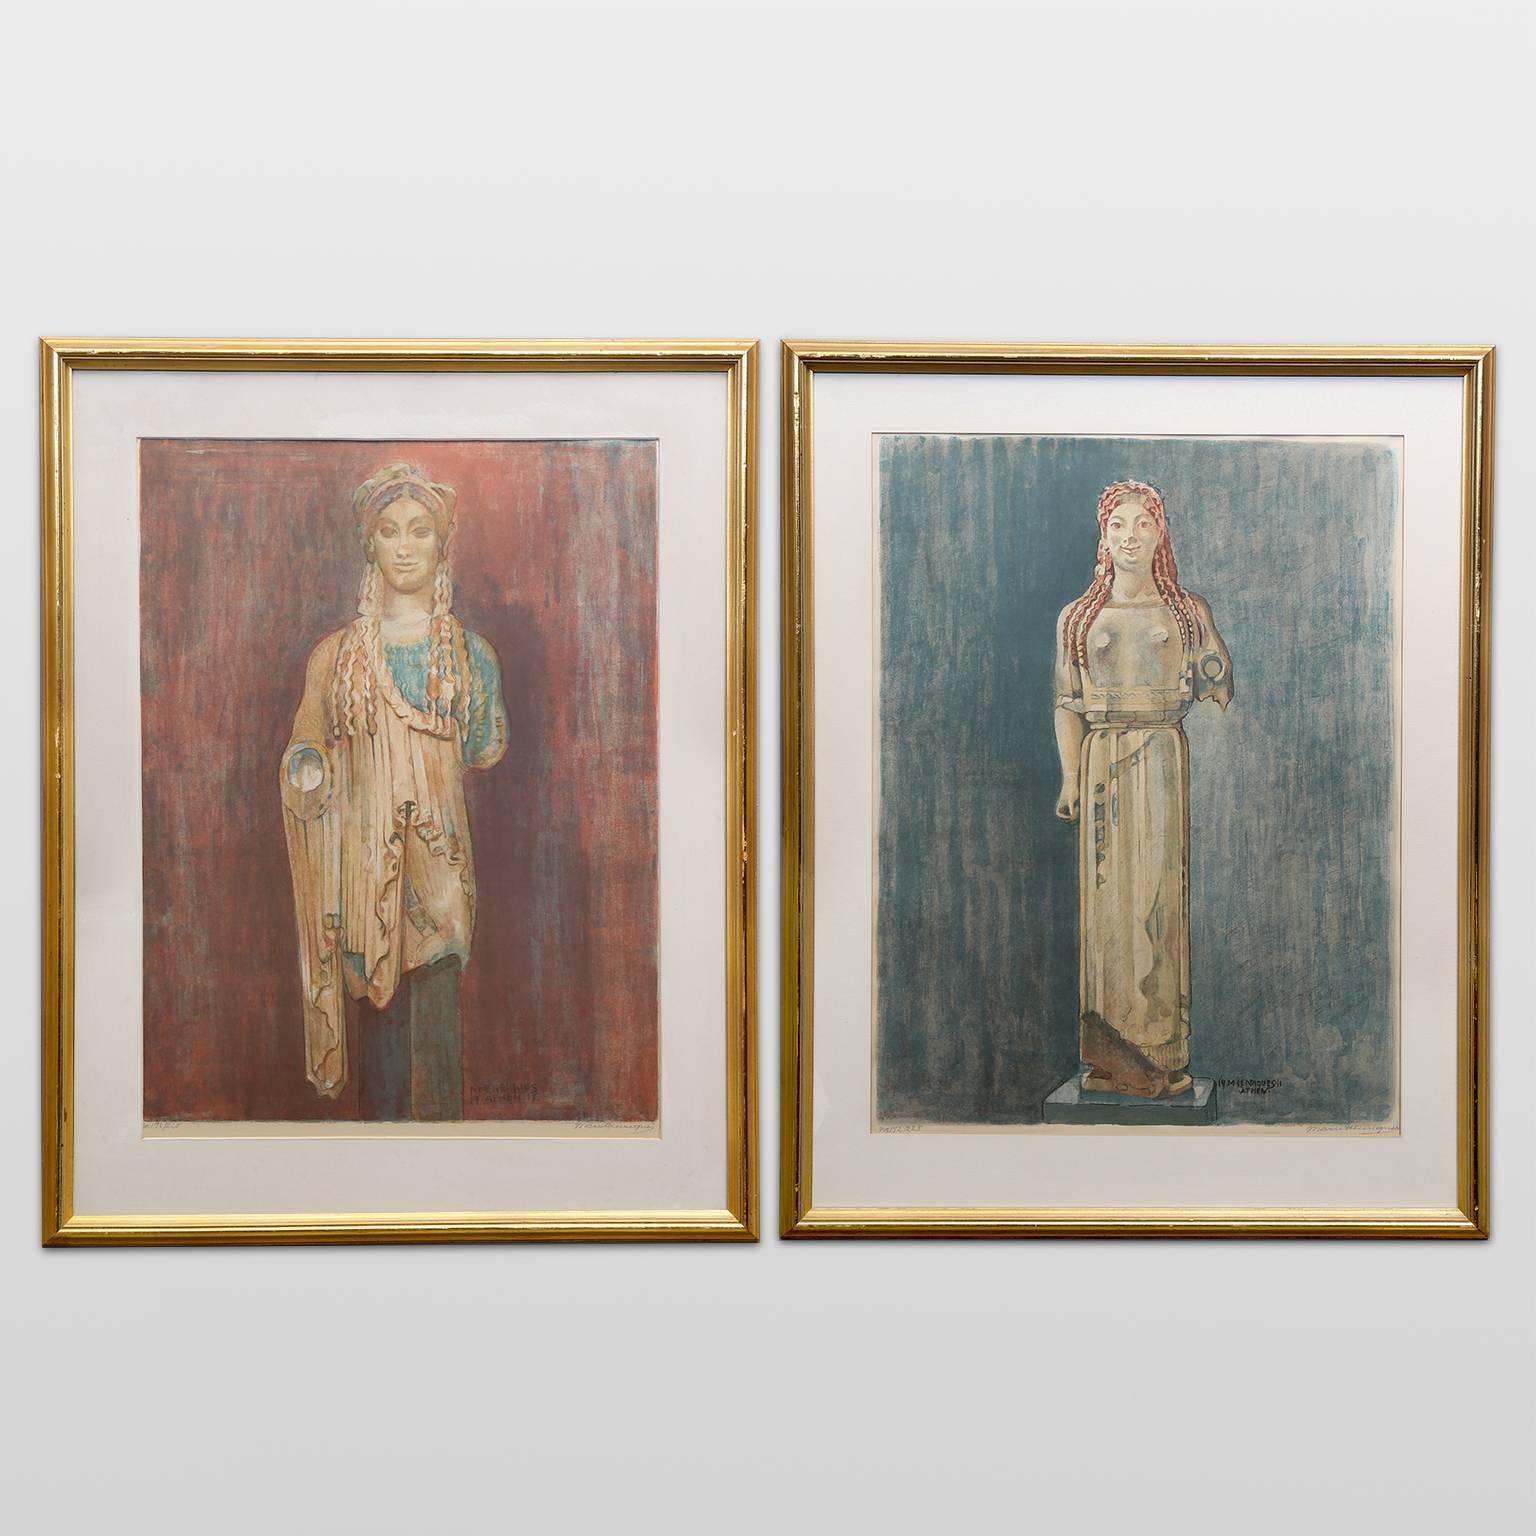 Pair of hand colored lithographs after the ancient polychrome sculptures from The Acropolis Museum, Athens, Greece. Executed by Marie Henriques. Published with a grant from the New Carlsberg Foundation, Copenhagen, 1911.

Both sculptures are